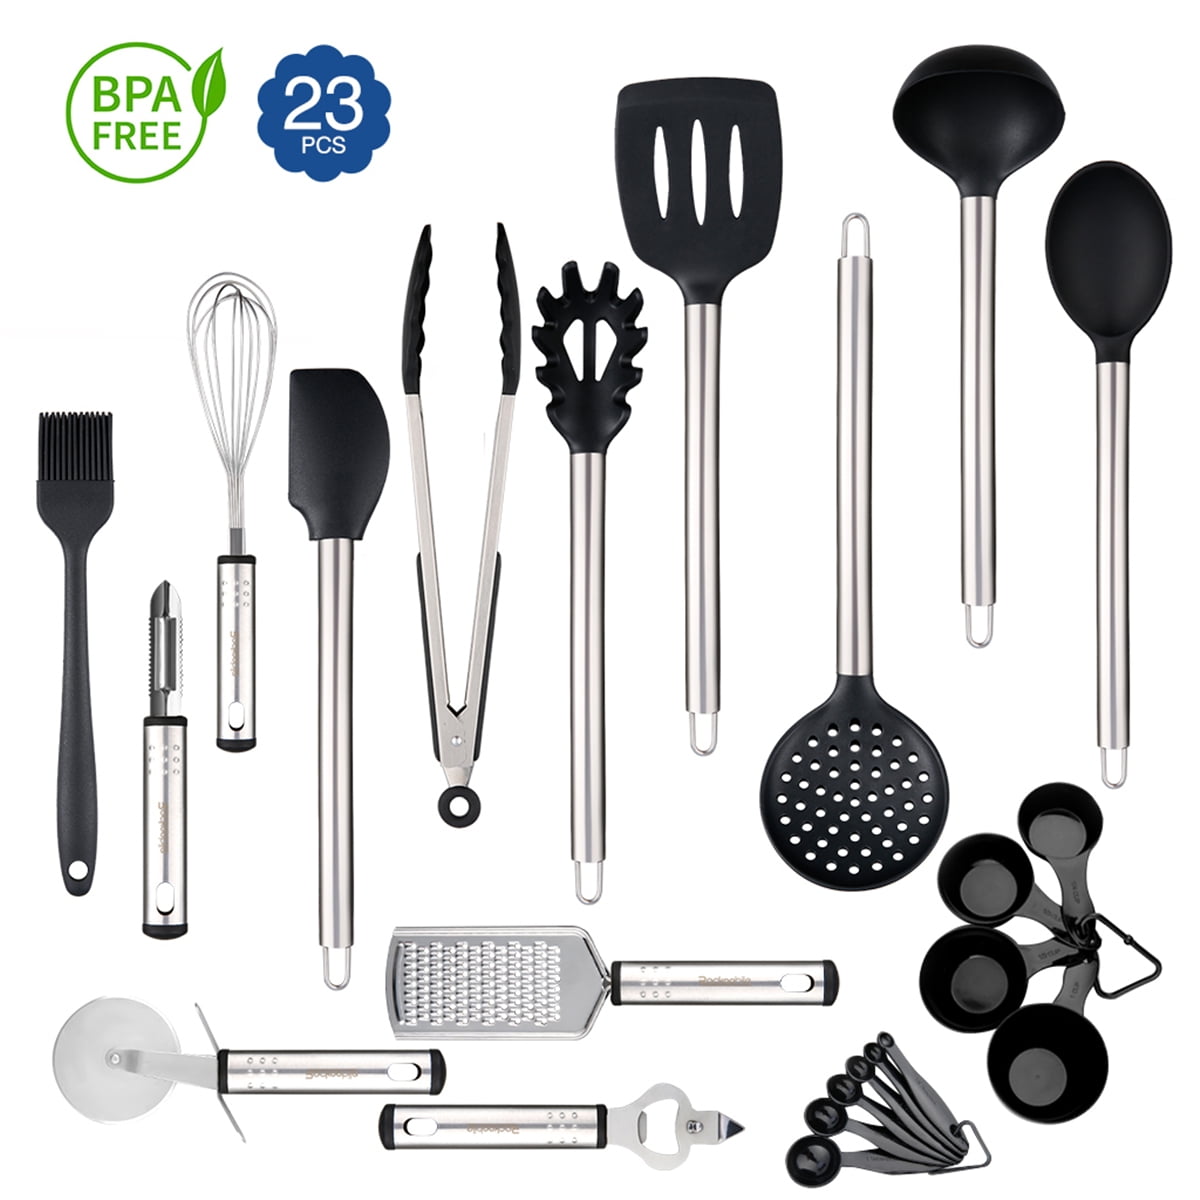 Silicone Cooking Utensils Kitchen Utensils Set 23pcs Stainless Steel Handles Non-Stick BPA-Free Non-Scratch Metal Spatula Measuring Cups & Spoons Kitchen Gadget Kitchen Cookware Utensil Colorful 